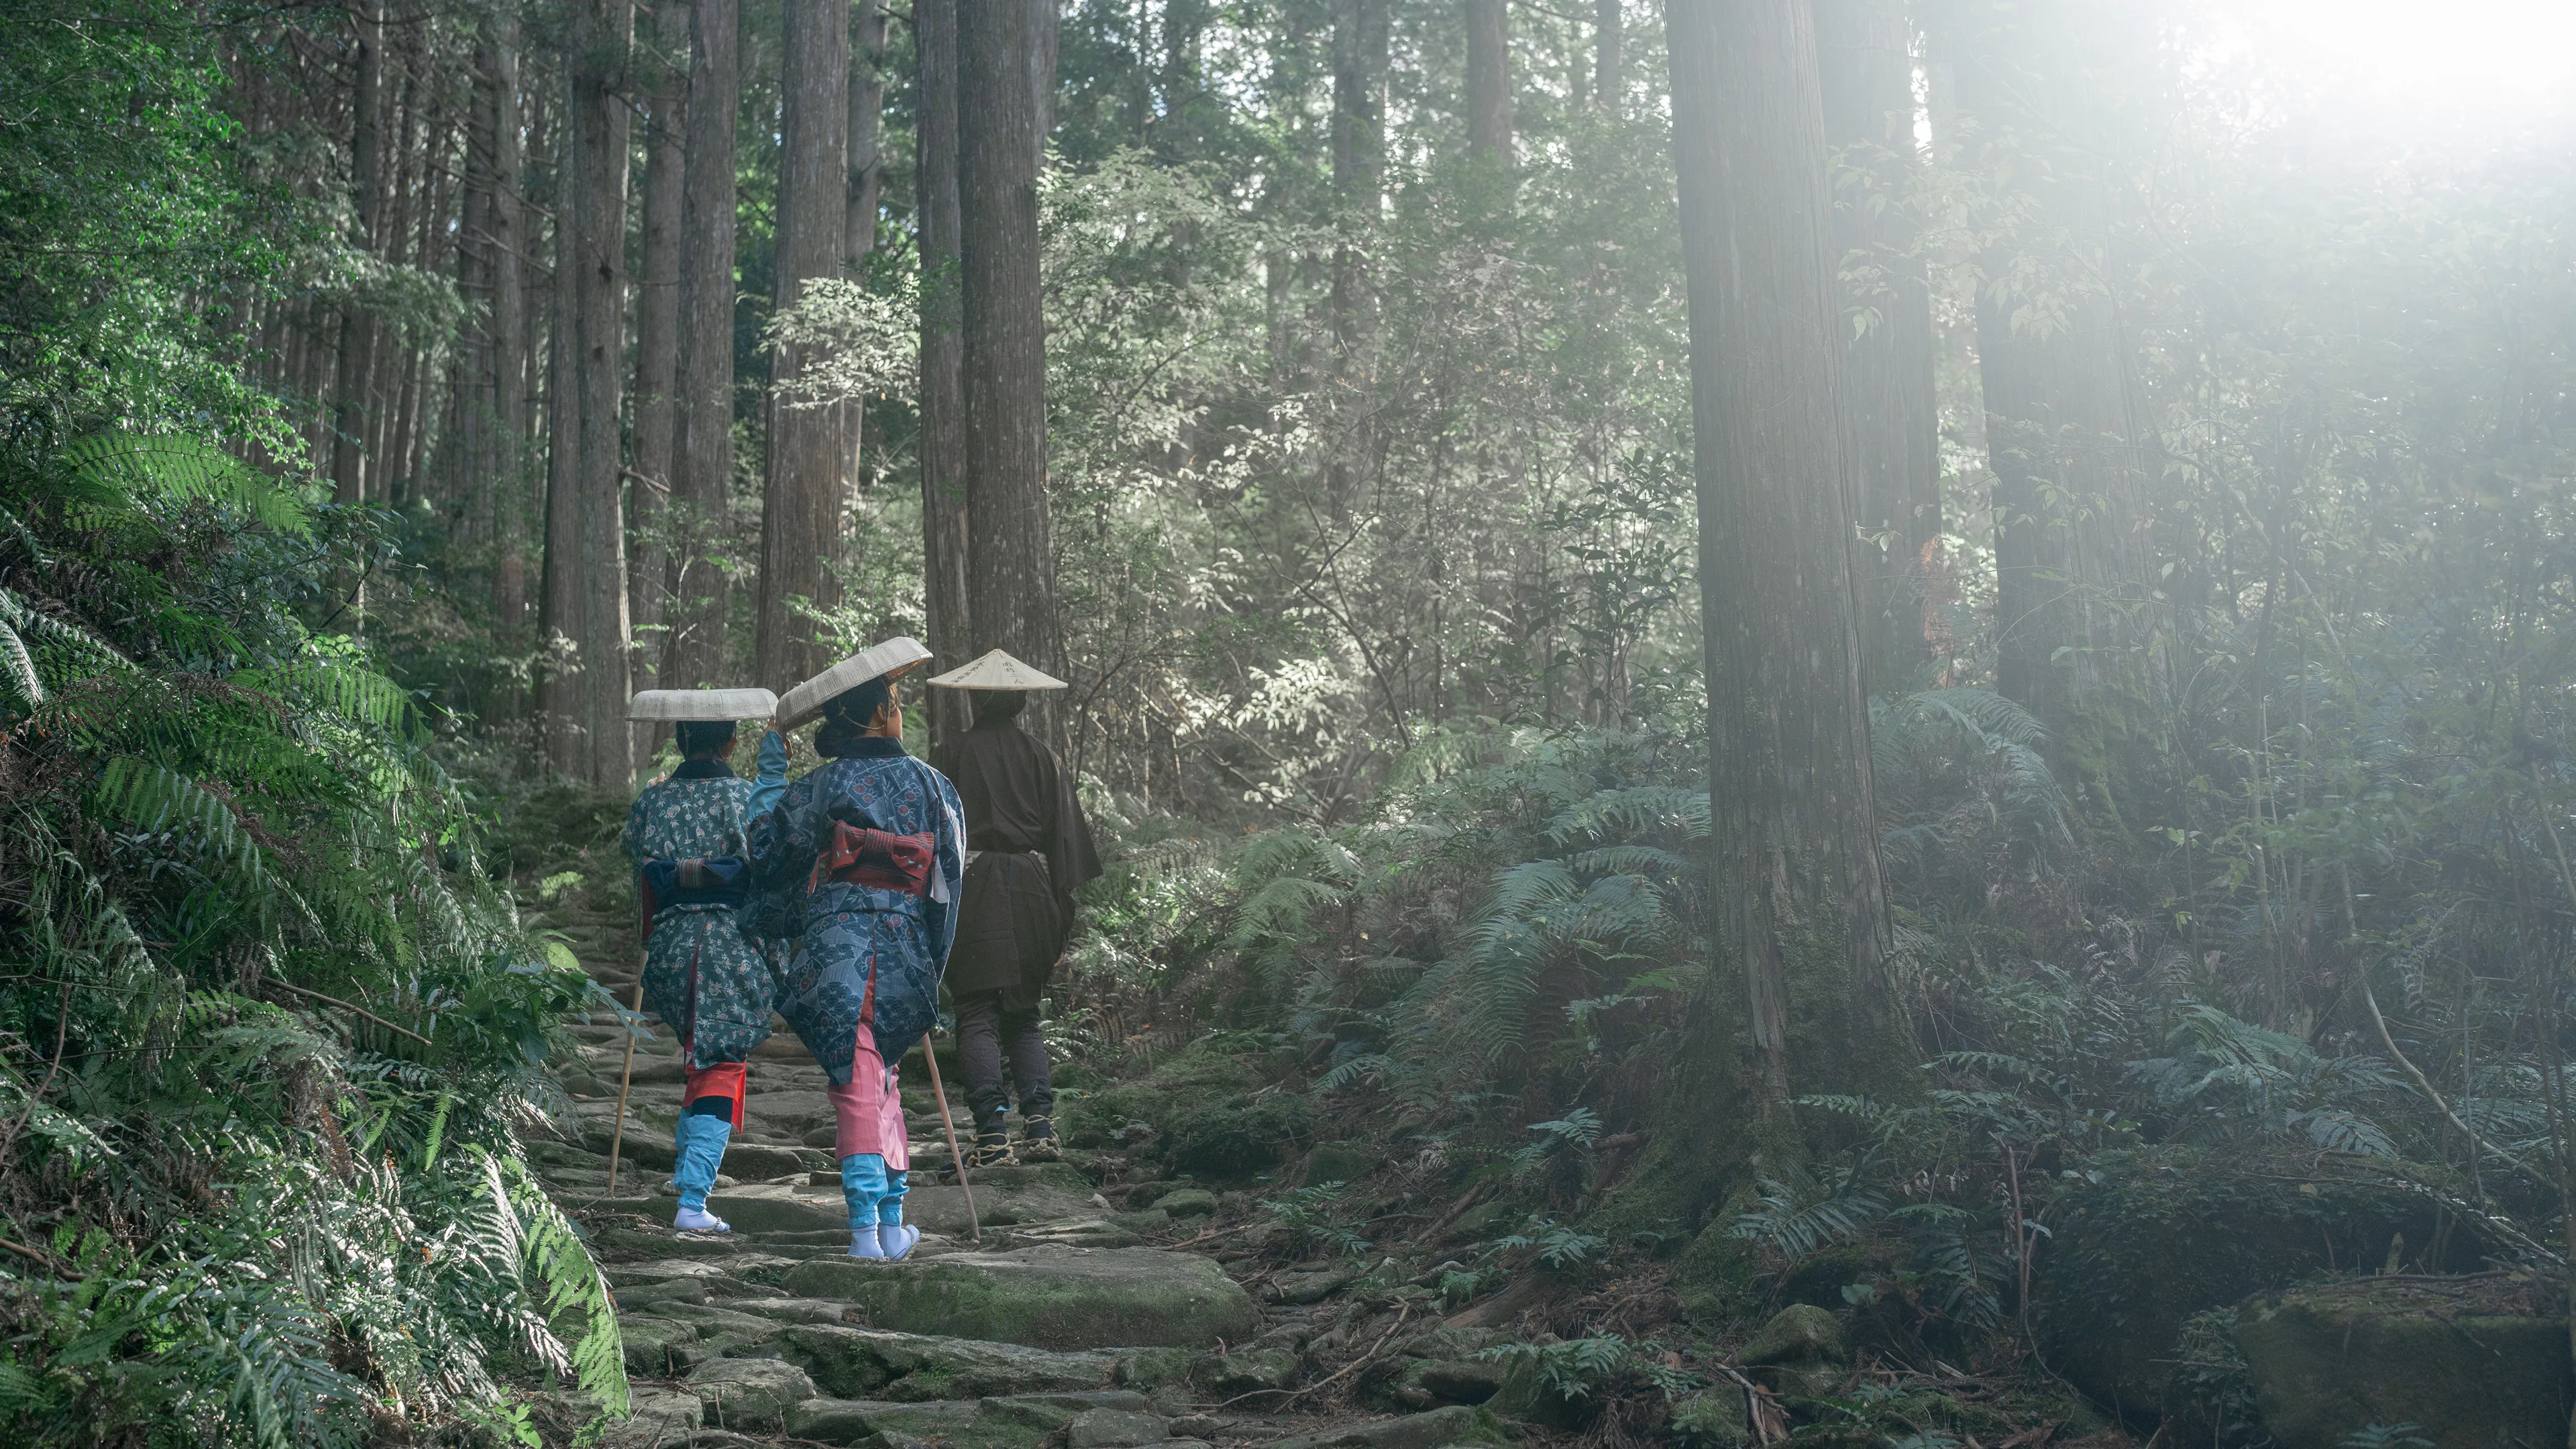 Walk the Magose pass on the Kumano Kodo trail, UNESCO World heritage site, in traditional travel garb